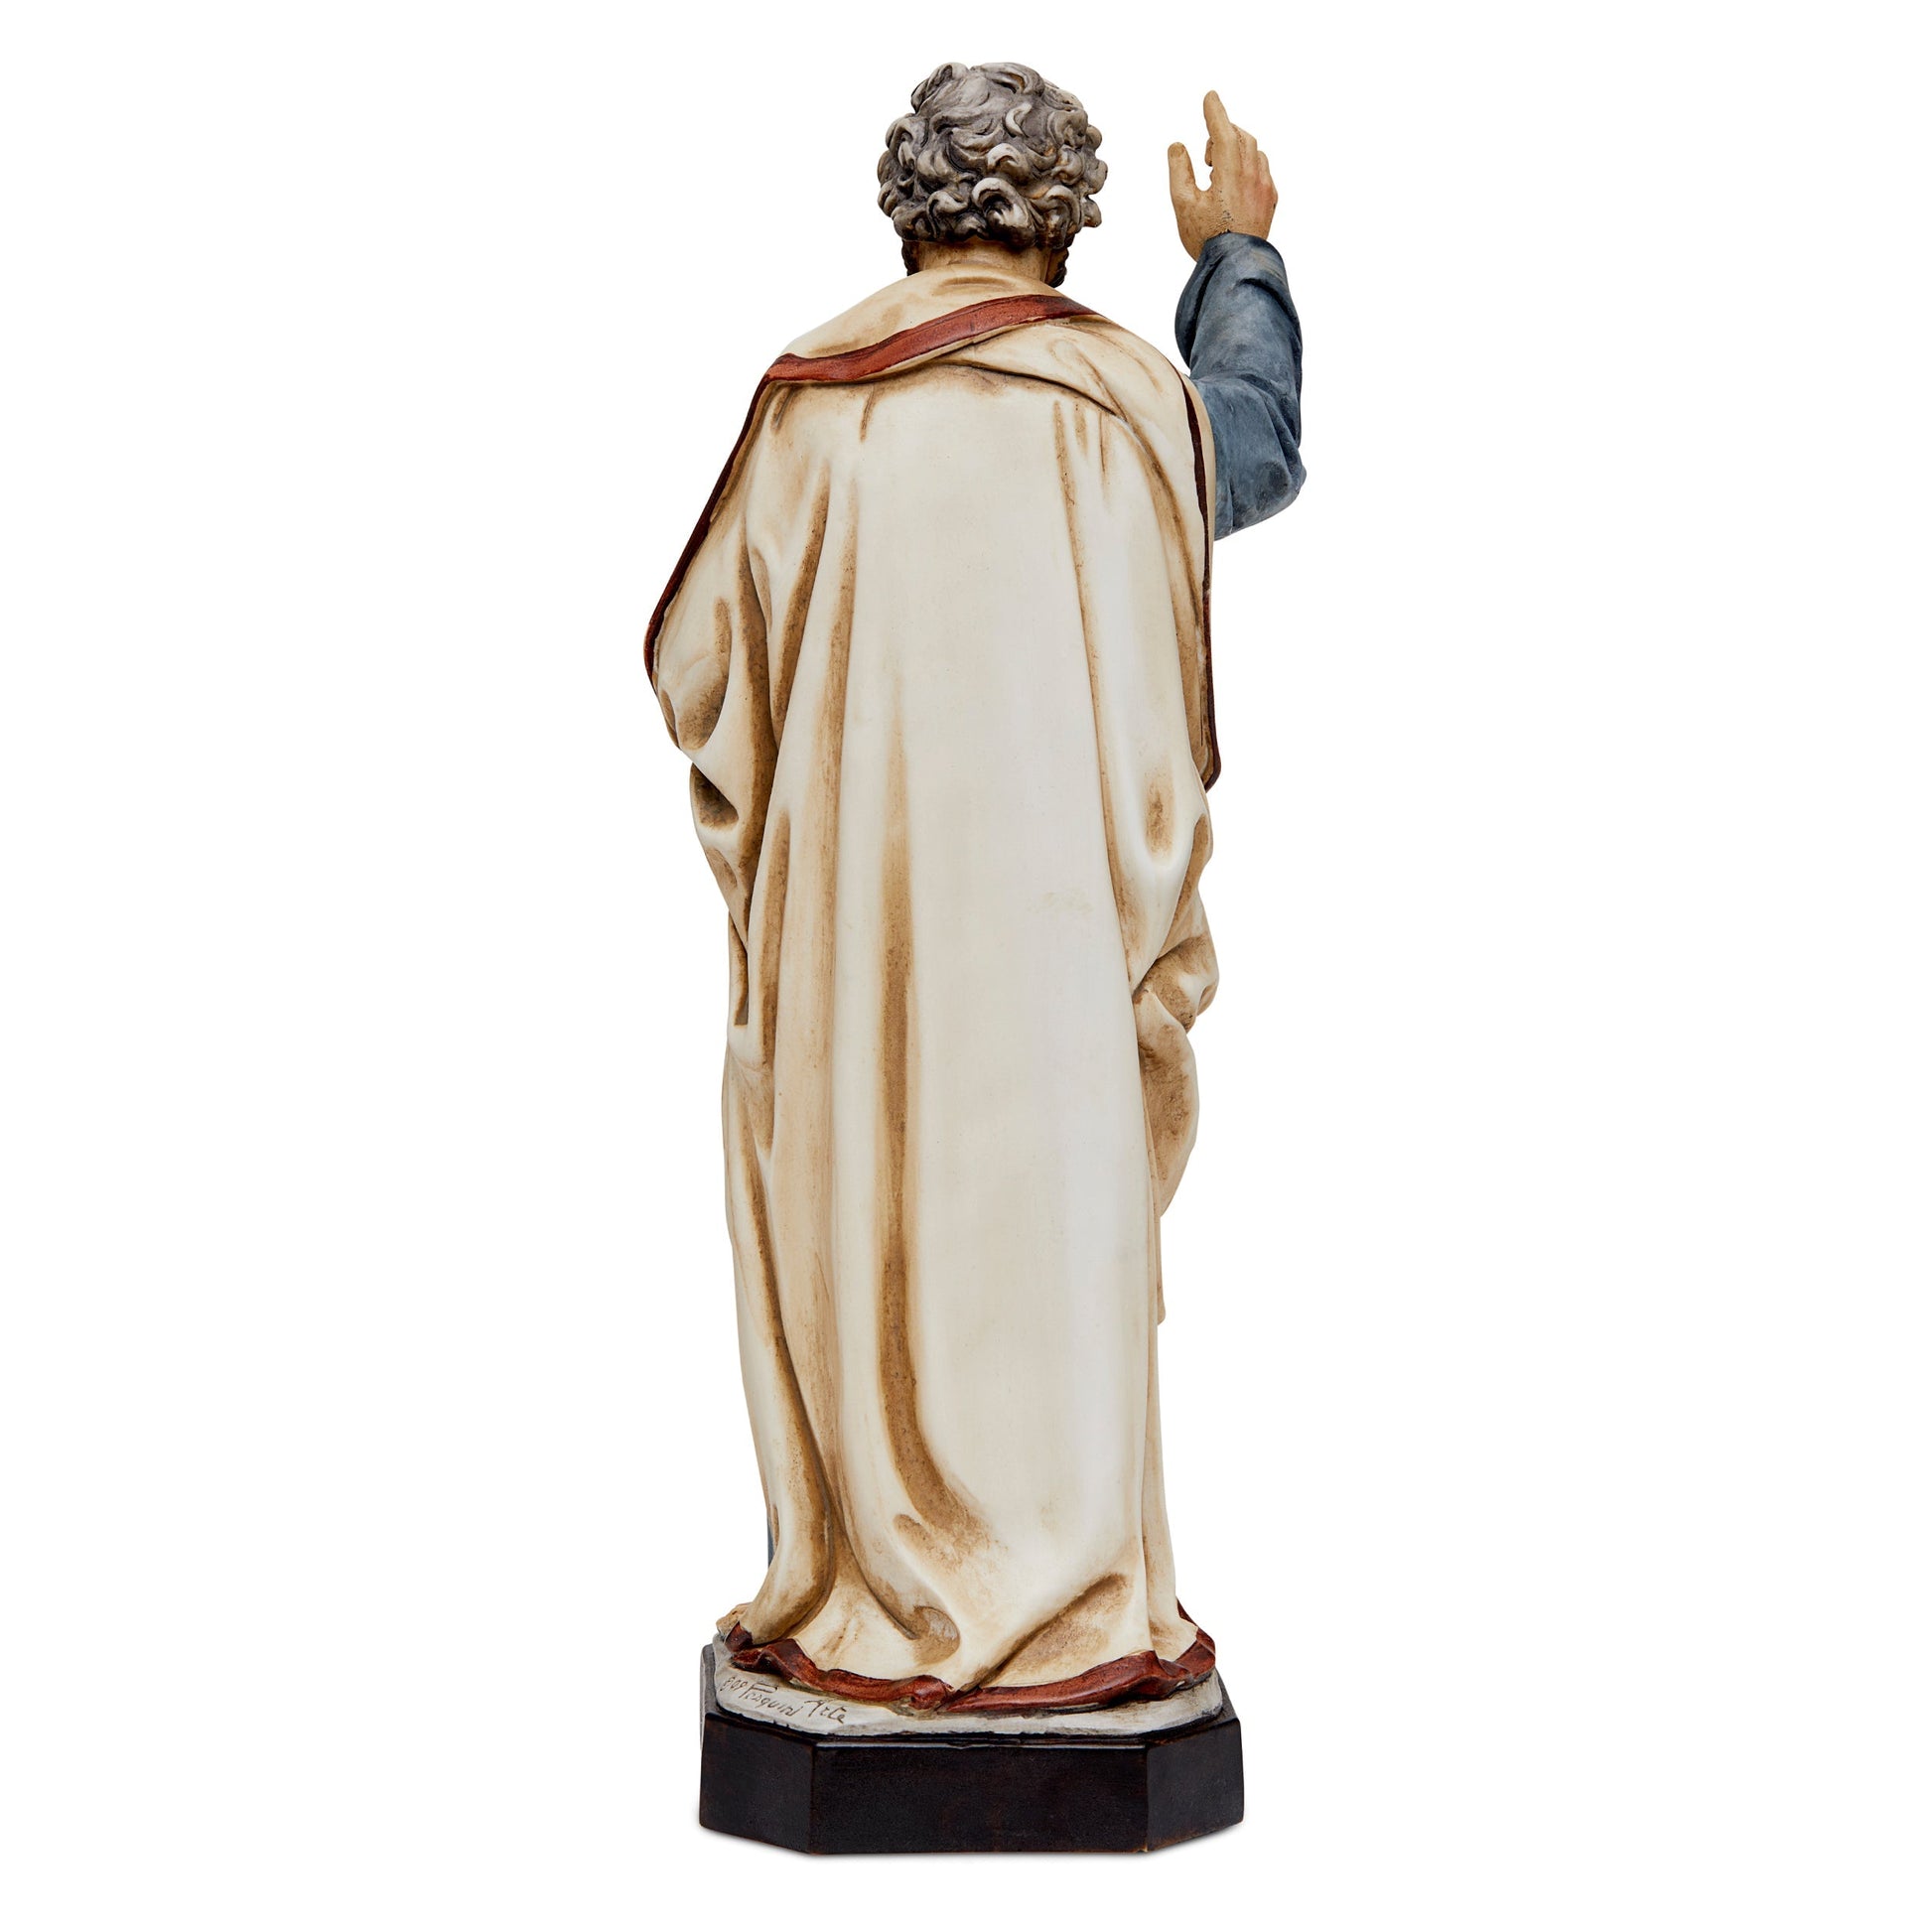 Mondo Cattolico 30 cm (11.81 in) Resin Statue of St. Peter the Apostle